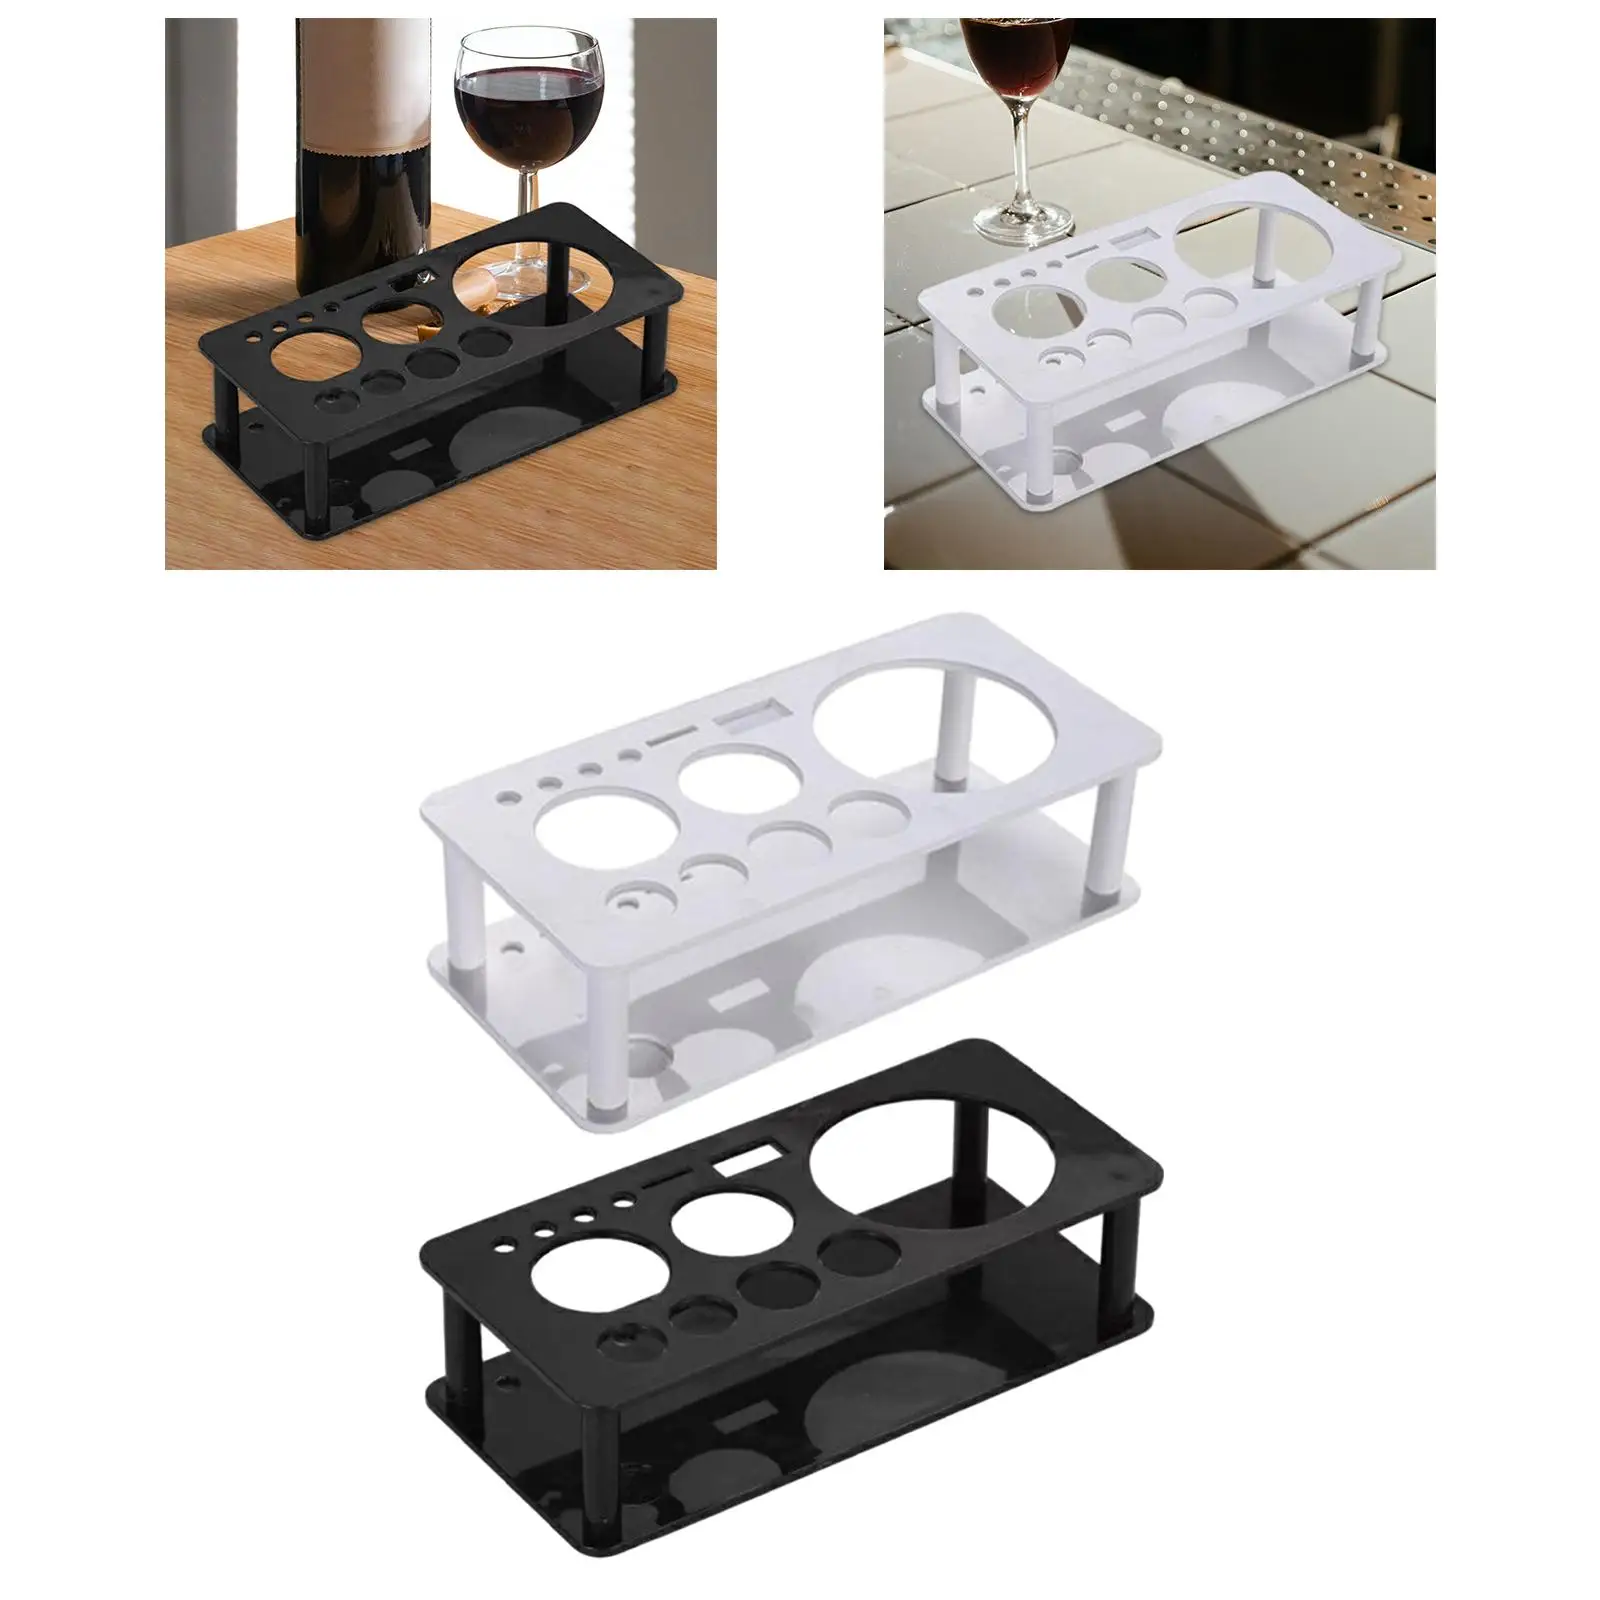 Bartending Tool Holder Bar Tool Accessories Stable Bartender Kits Storage Stand for Bar Wedding Cocktail Party